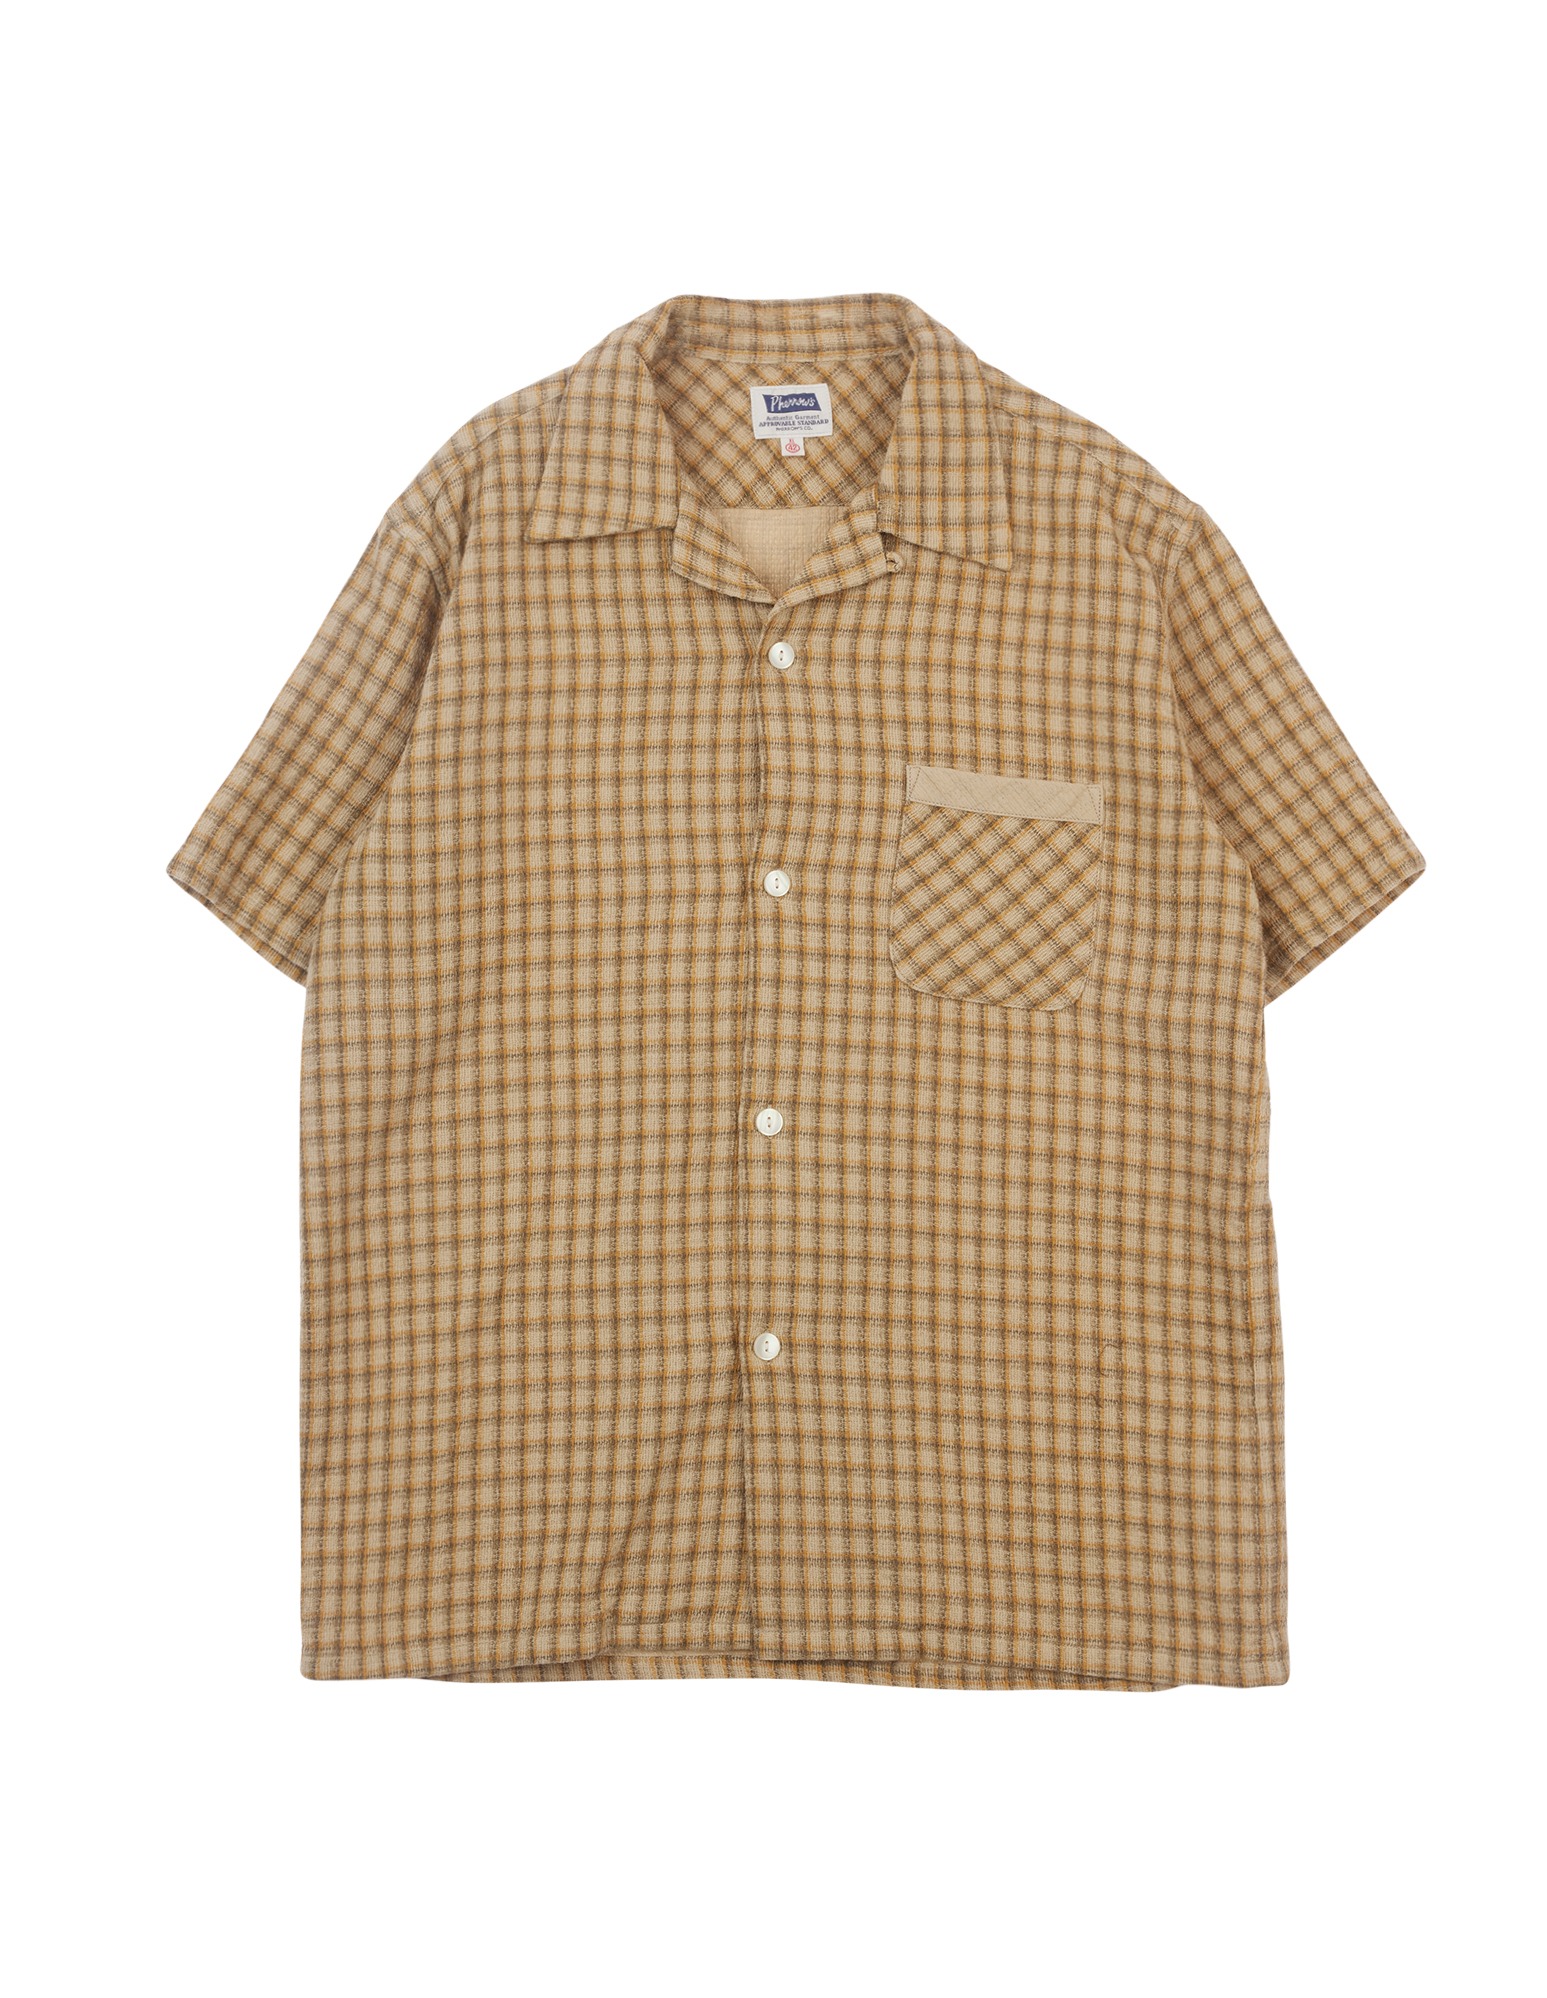 Open Collar S/S Check Shirts (Beige)